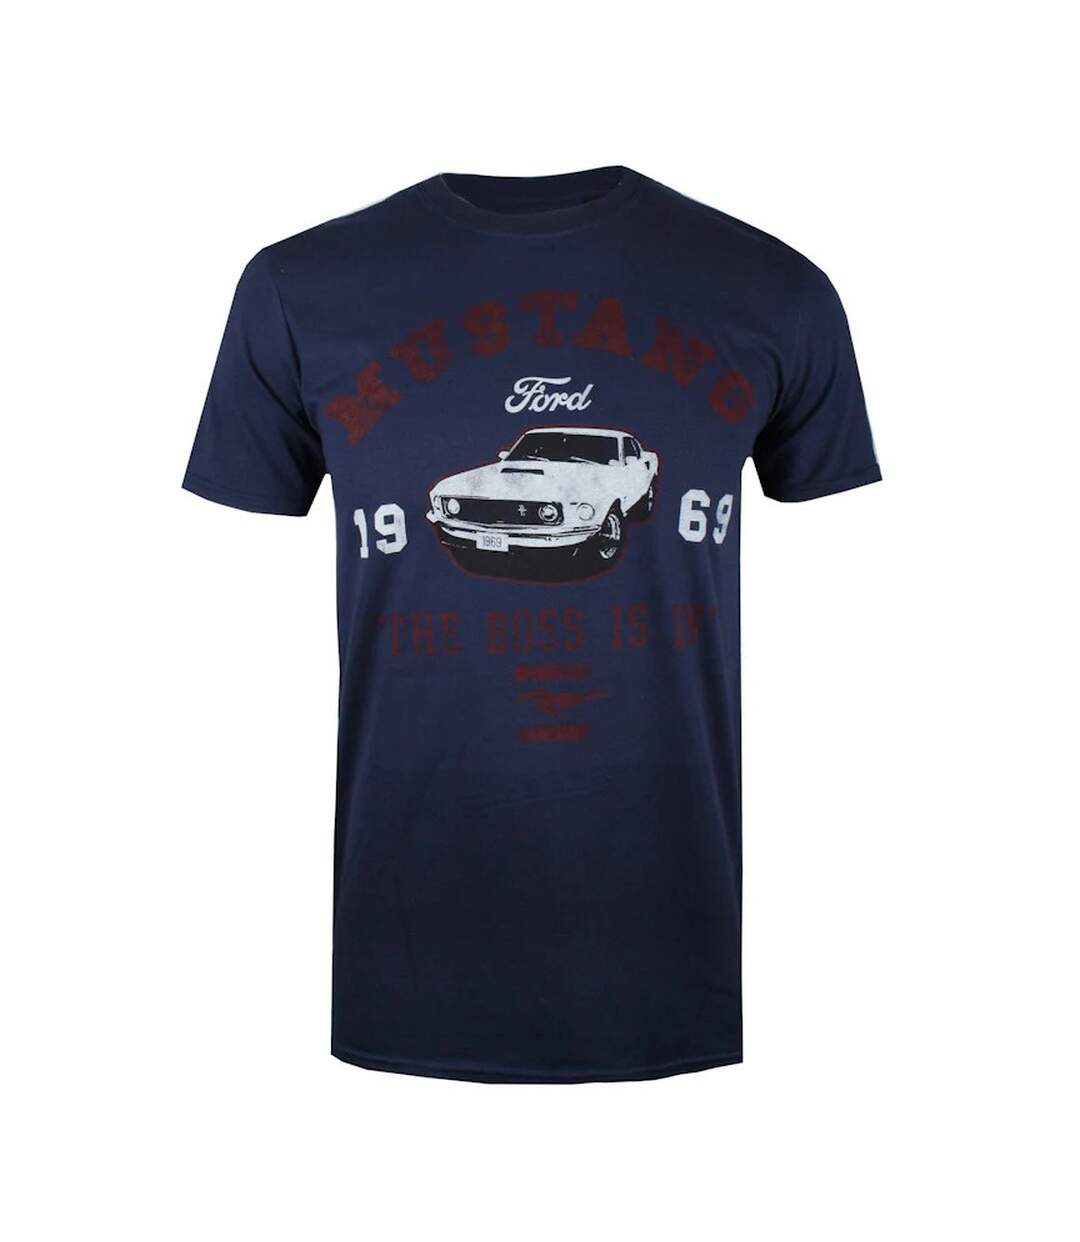 Ford - T-shirt MUSTANG THE BOSS IS IN - Homme (Bleu marine) - UTTV1373